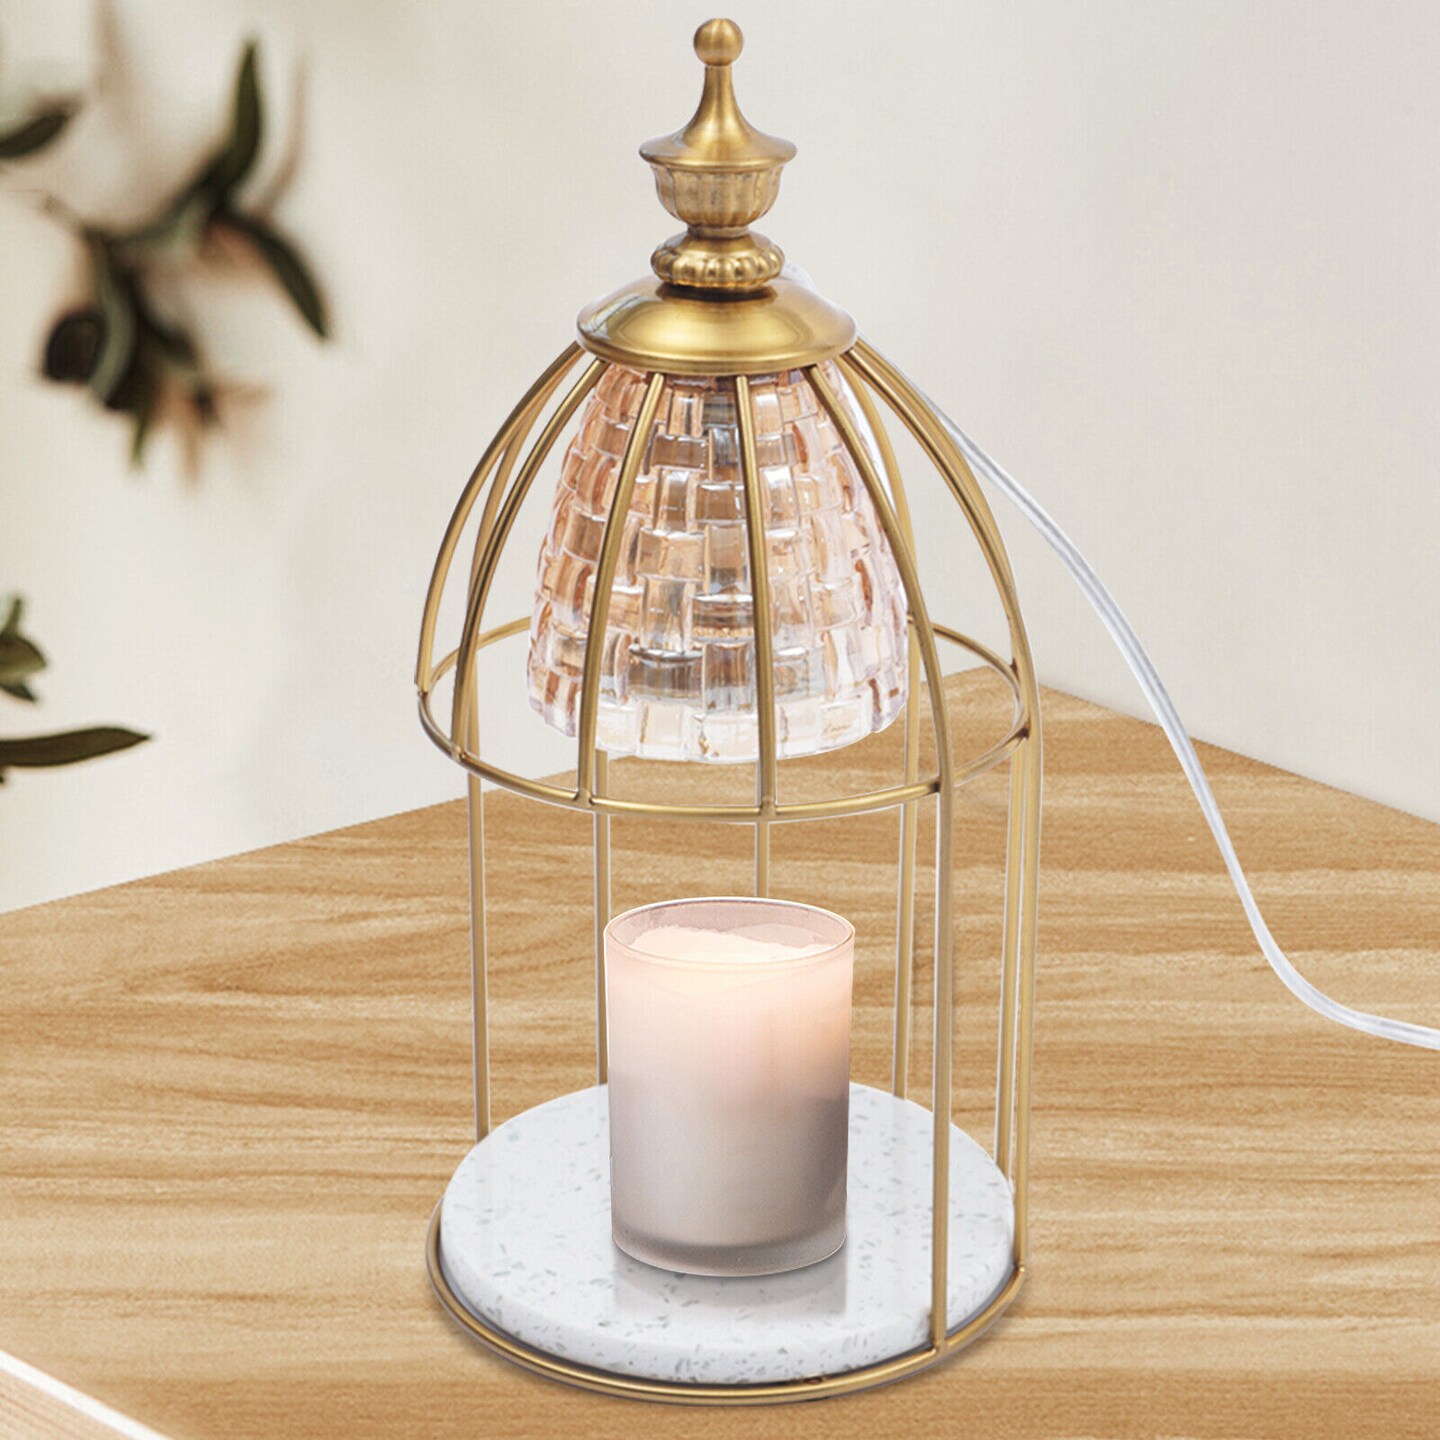 Kitcheniva Gold Bird Cage Style Electric Candle Warmer